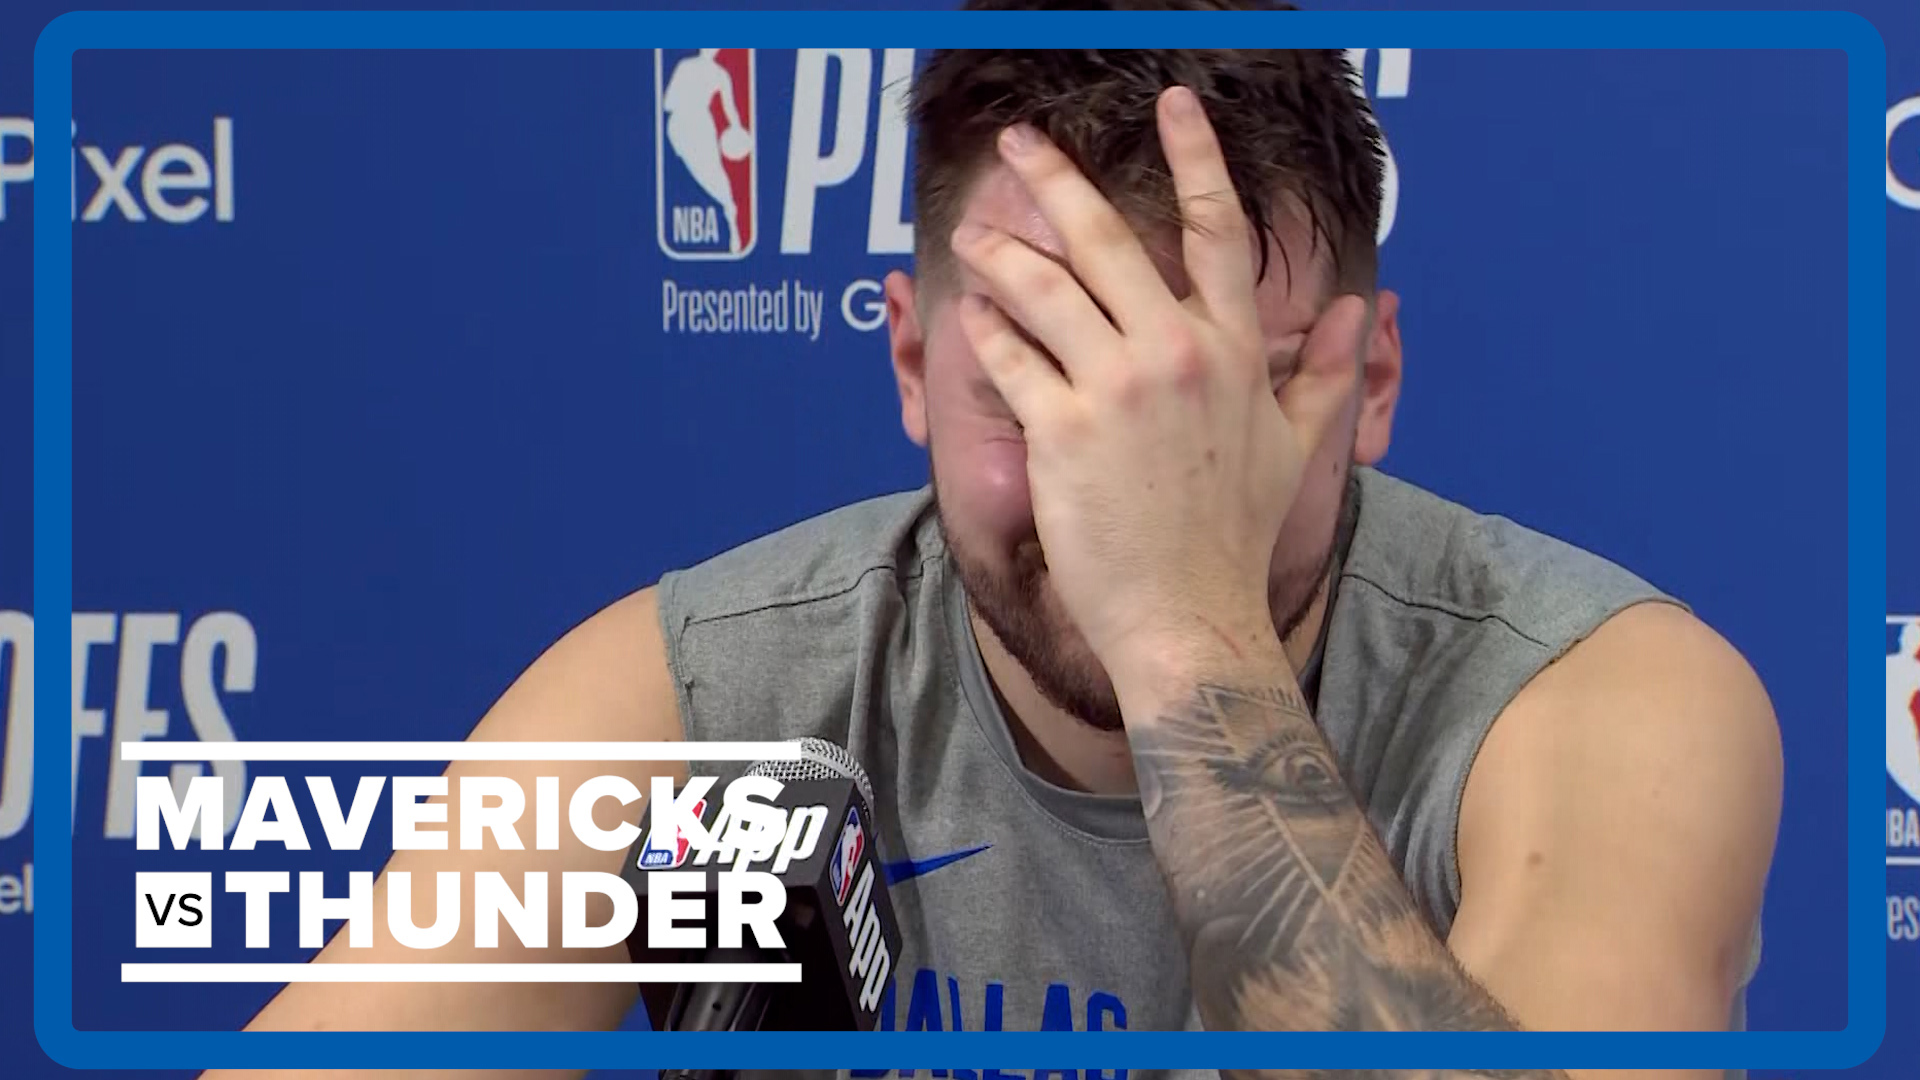 Dallas Mavericks star Luka Doncic and coach Jason Kidd sat down for a postgame press conference after the big win over the Thunder.